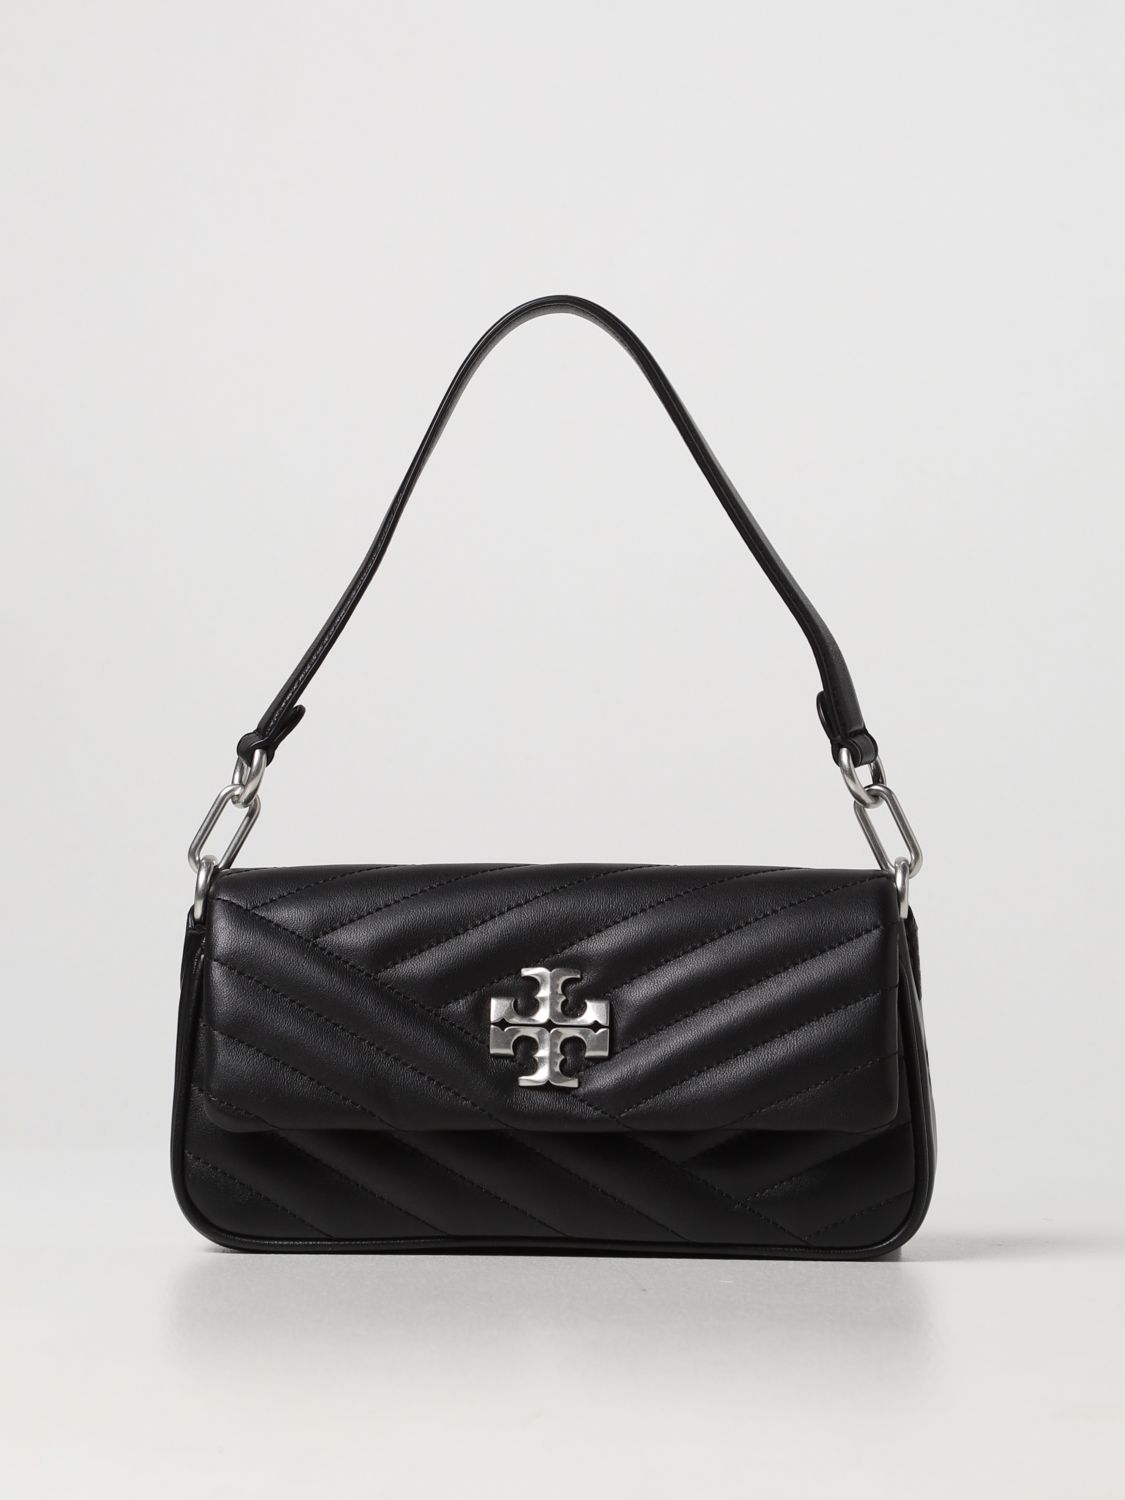 Tory Burch Outlet: Kira bag in quilted leather - Black 1 | Tory Burch ...